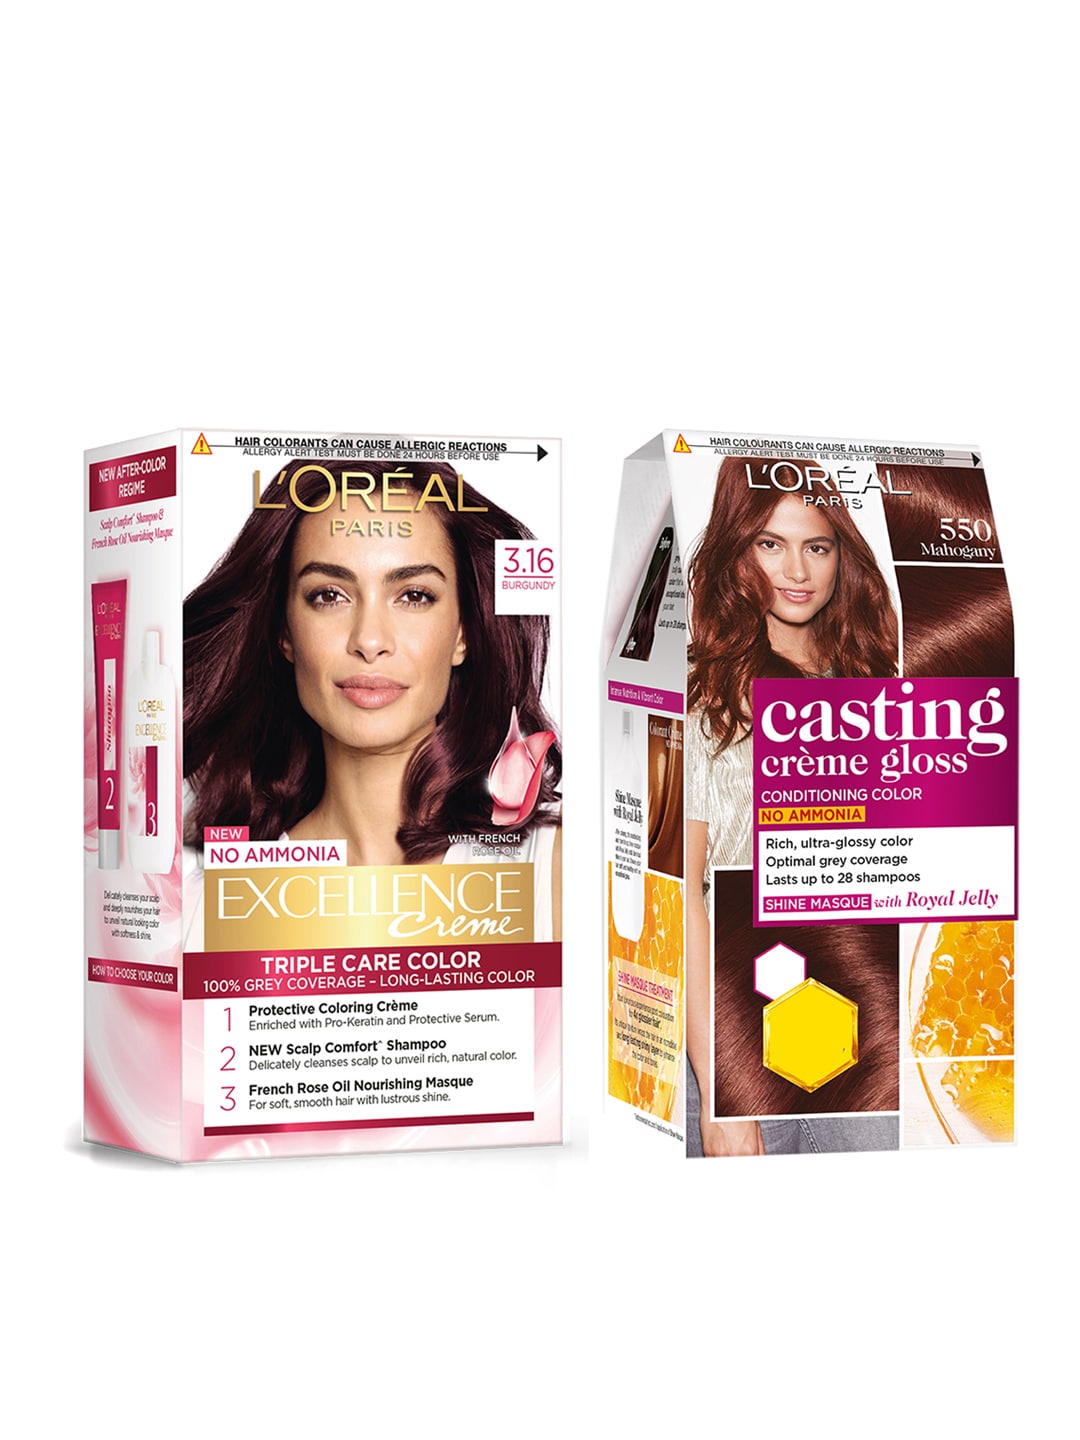 Loreal Paris Set of Casting Creme Gloss & Excellence Creme Hair Colour Price in India